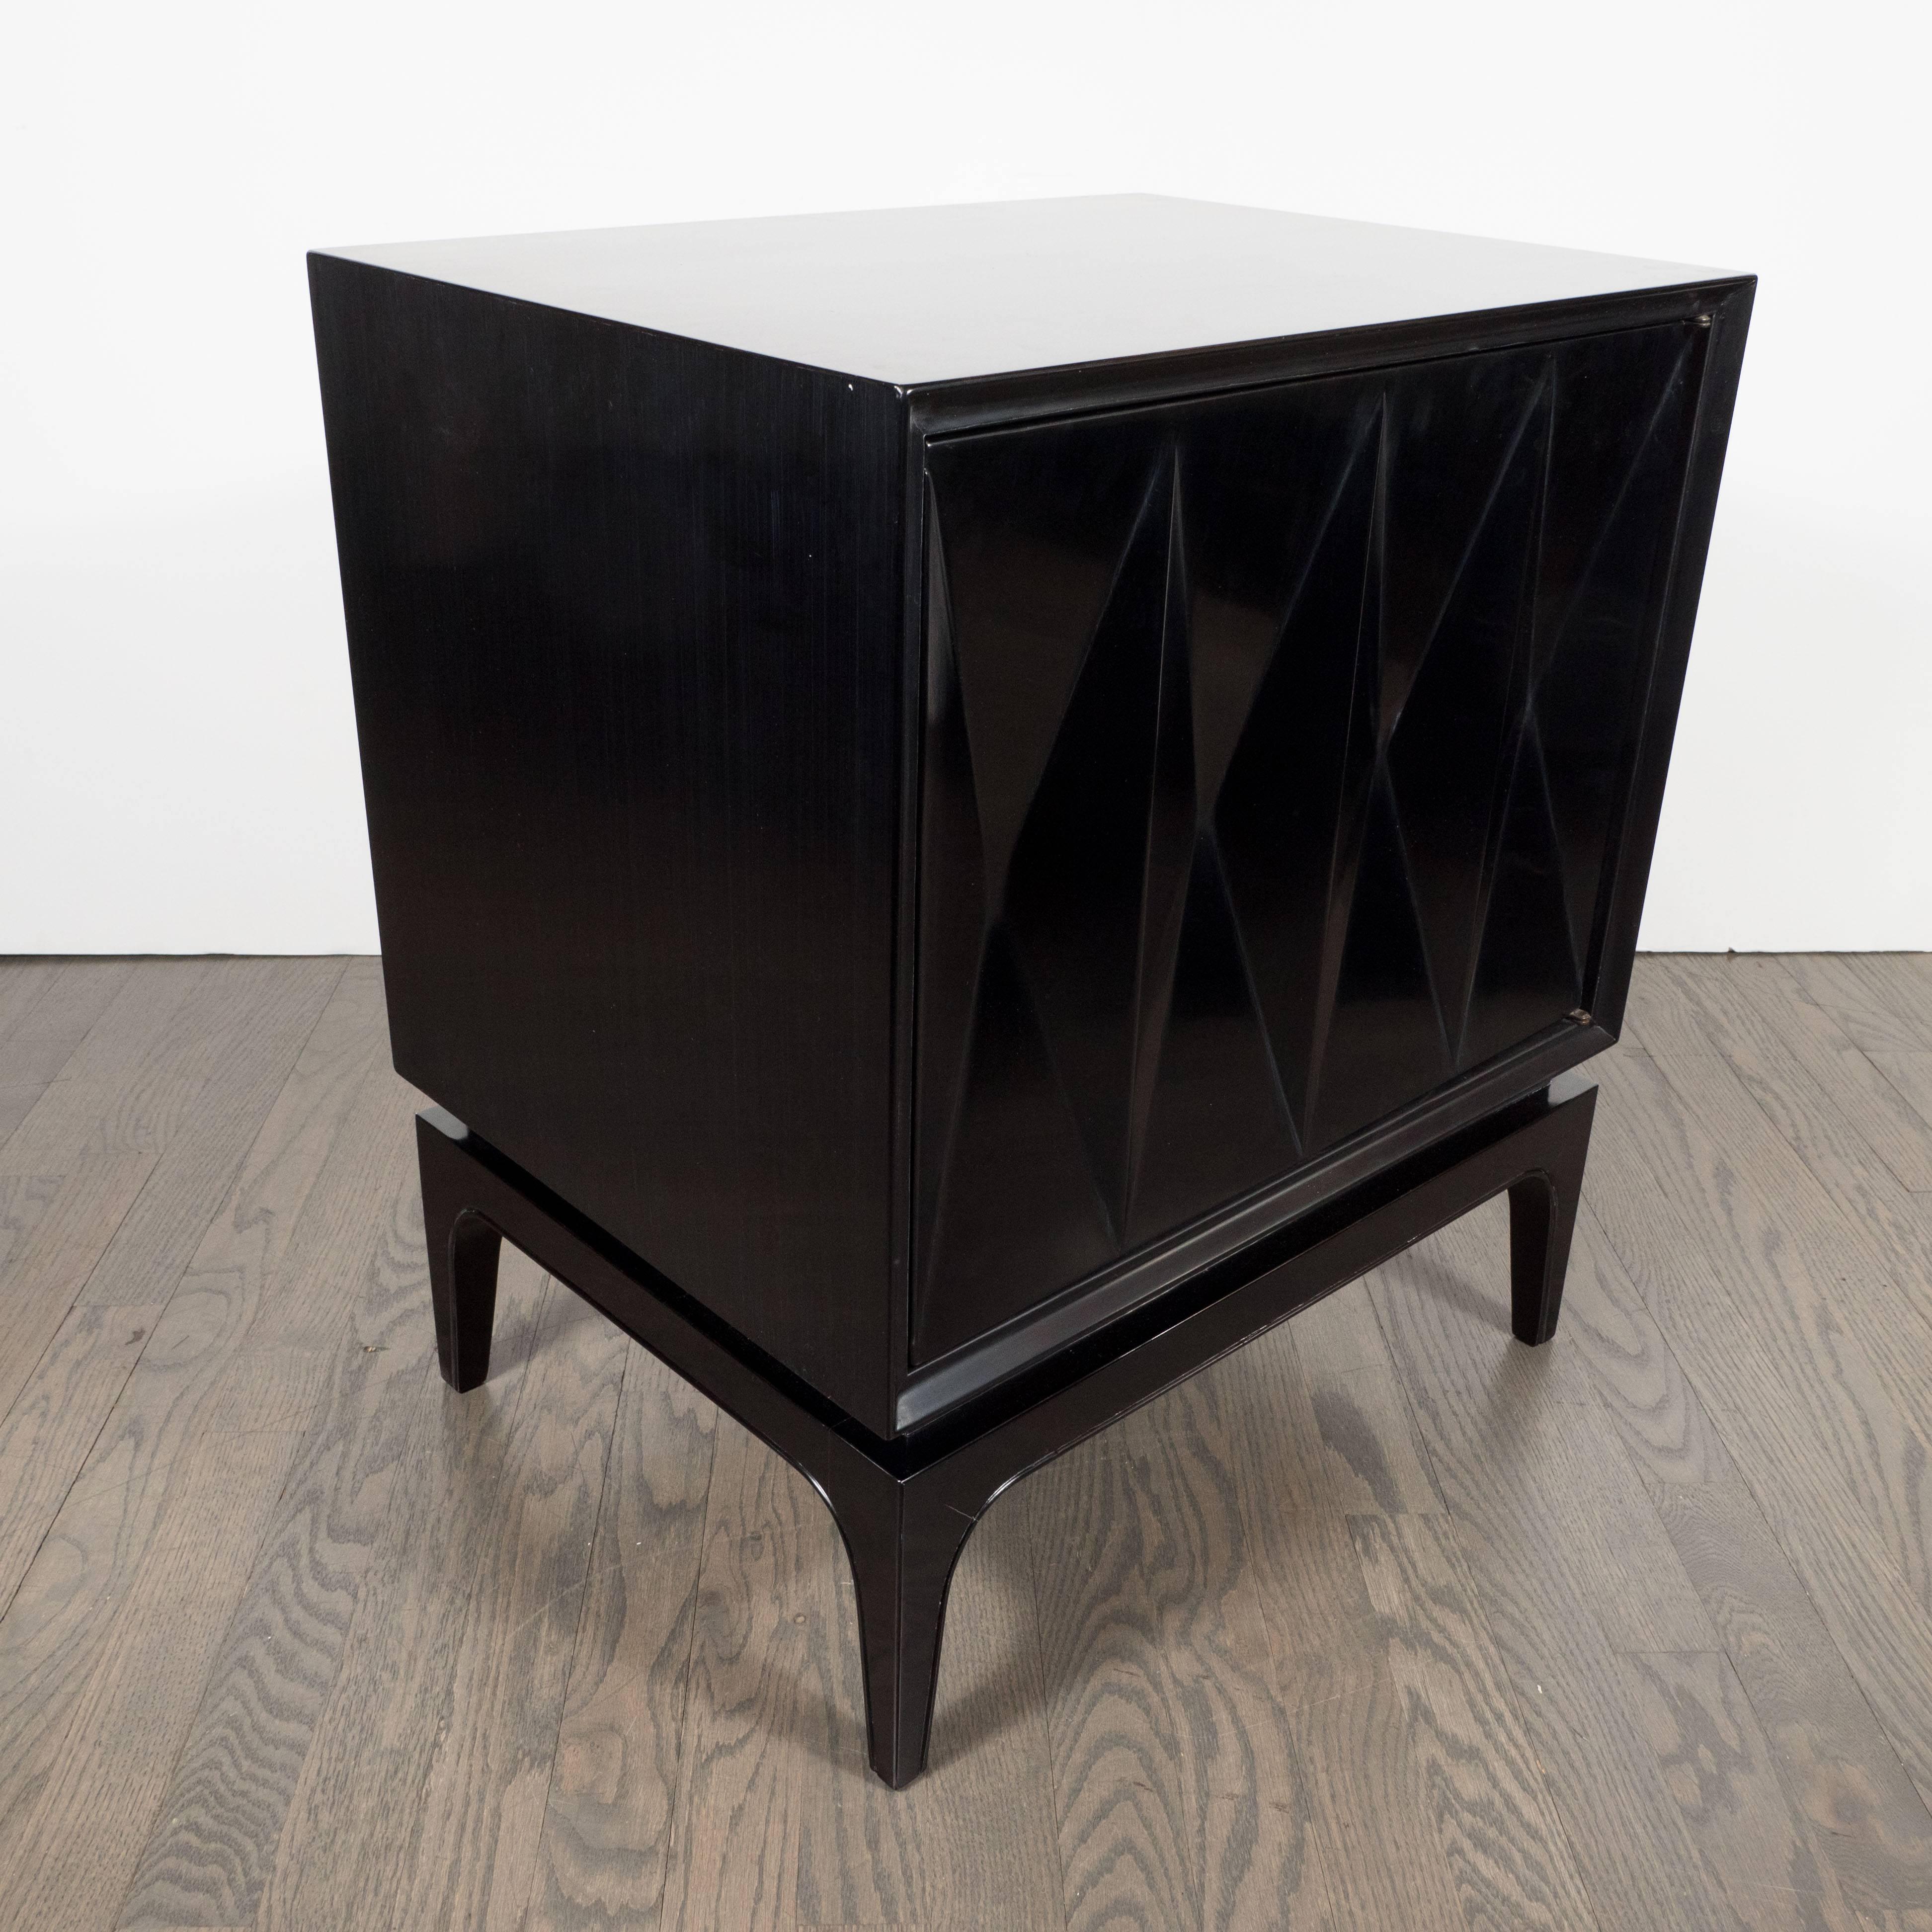 This sophisticated pair of ebonized walnut end tables or nightstands feature four rectangular panels with a concave cut triple diamond front panel, brass fittings, tapered conical legs, and an interior cabinet with one glass shelf. This pair